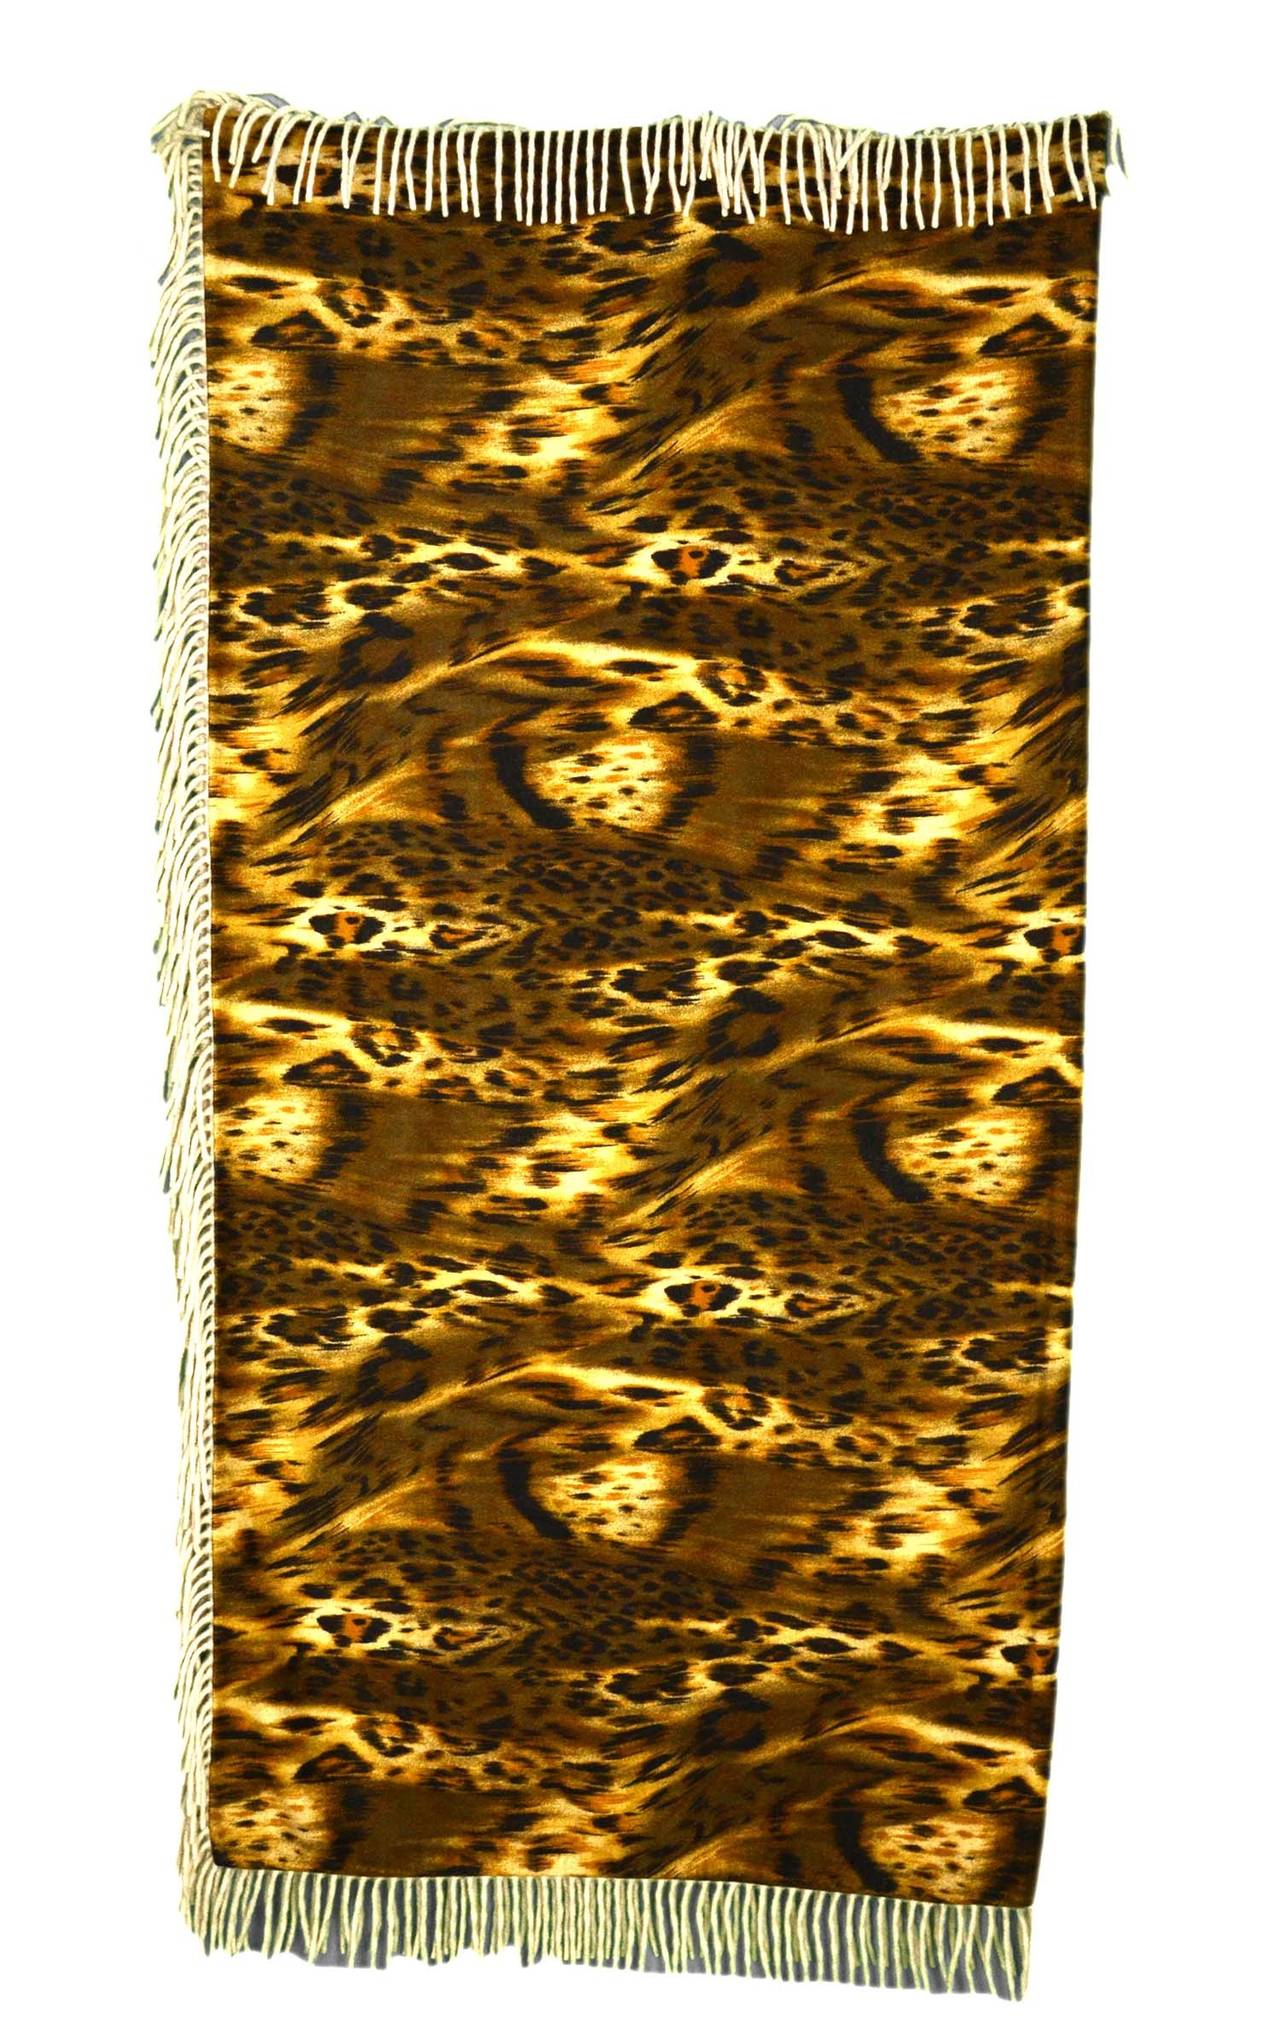 Features one side with leopard pattern and the other is solid in an oatmeal color. This piece can be worn as a cape/shawl or used as a blanket/throw

-Made in: Italy
-Color: Brown/Black/Oatmeal
-Composition:100% Cashmere
-Tags: Loro Piana